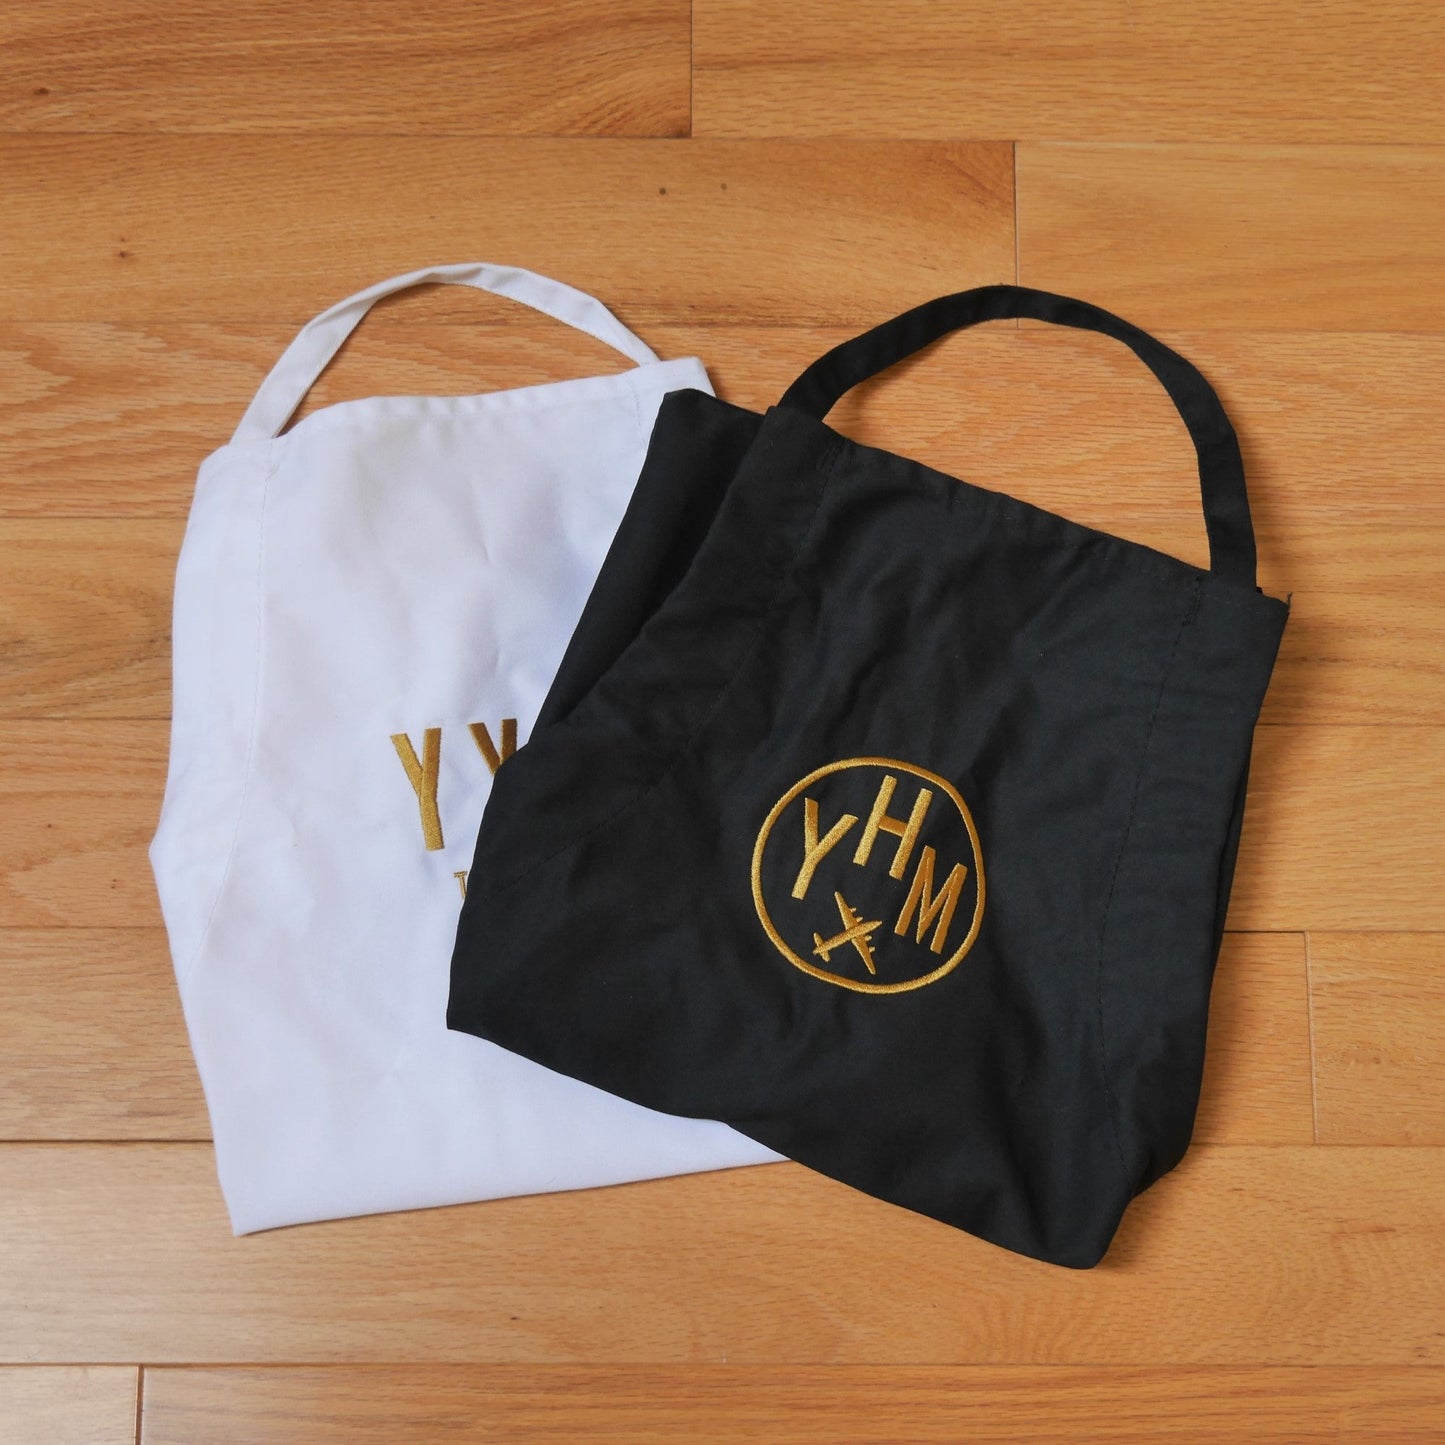 City Embroidered Apron - Old Gold • JFK New York City • YHM Designs - Image 14